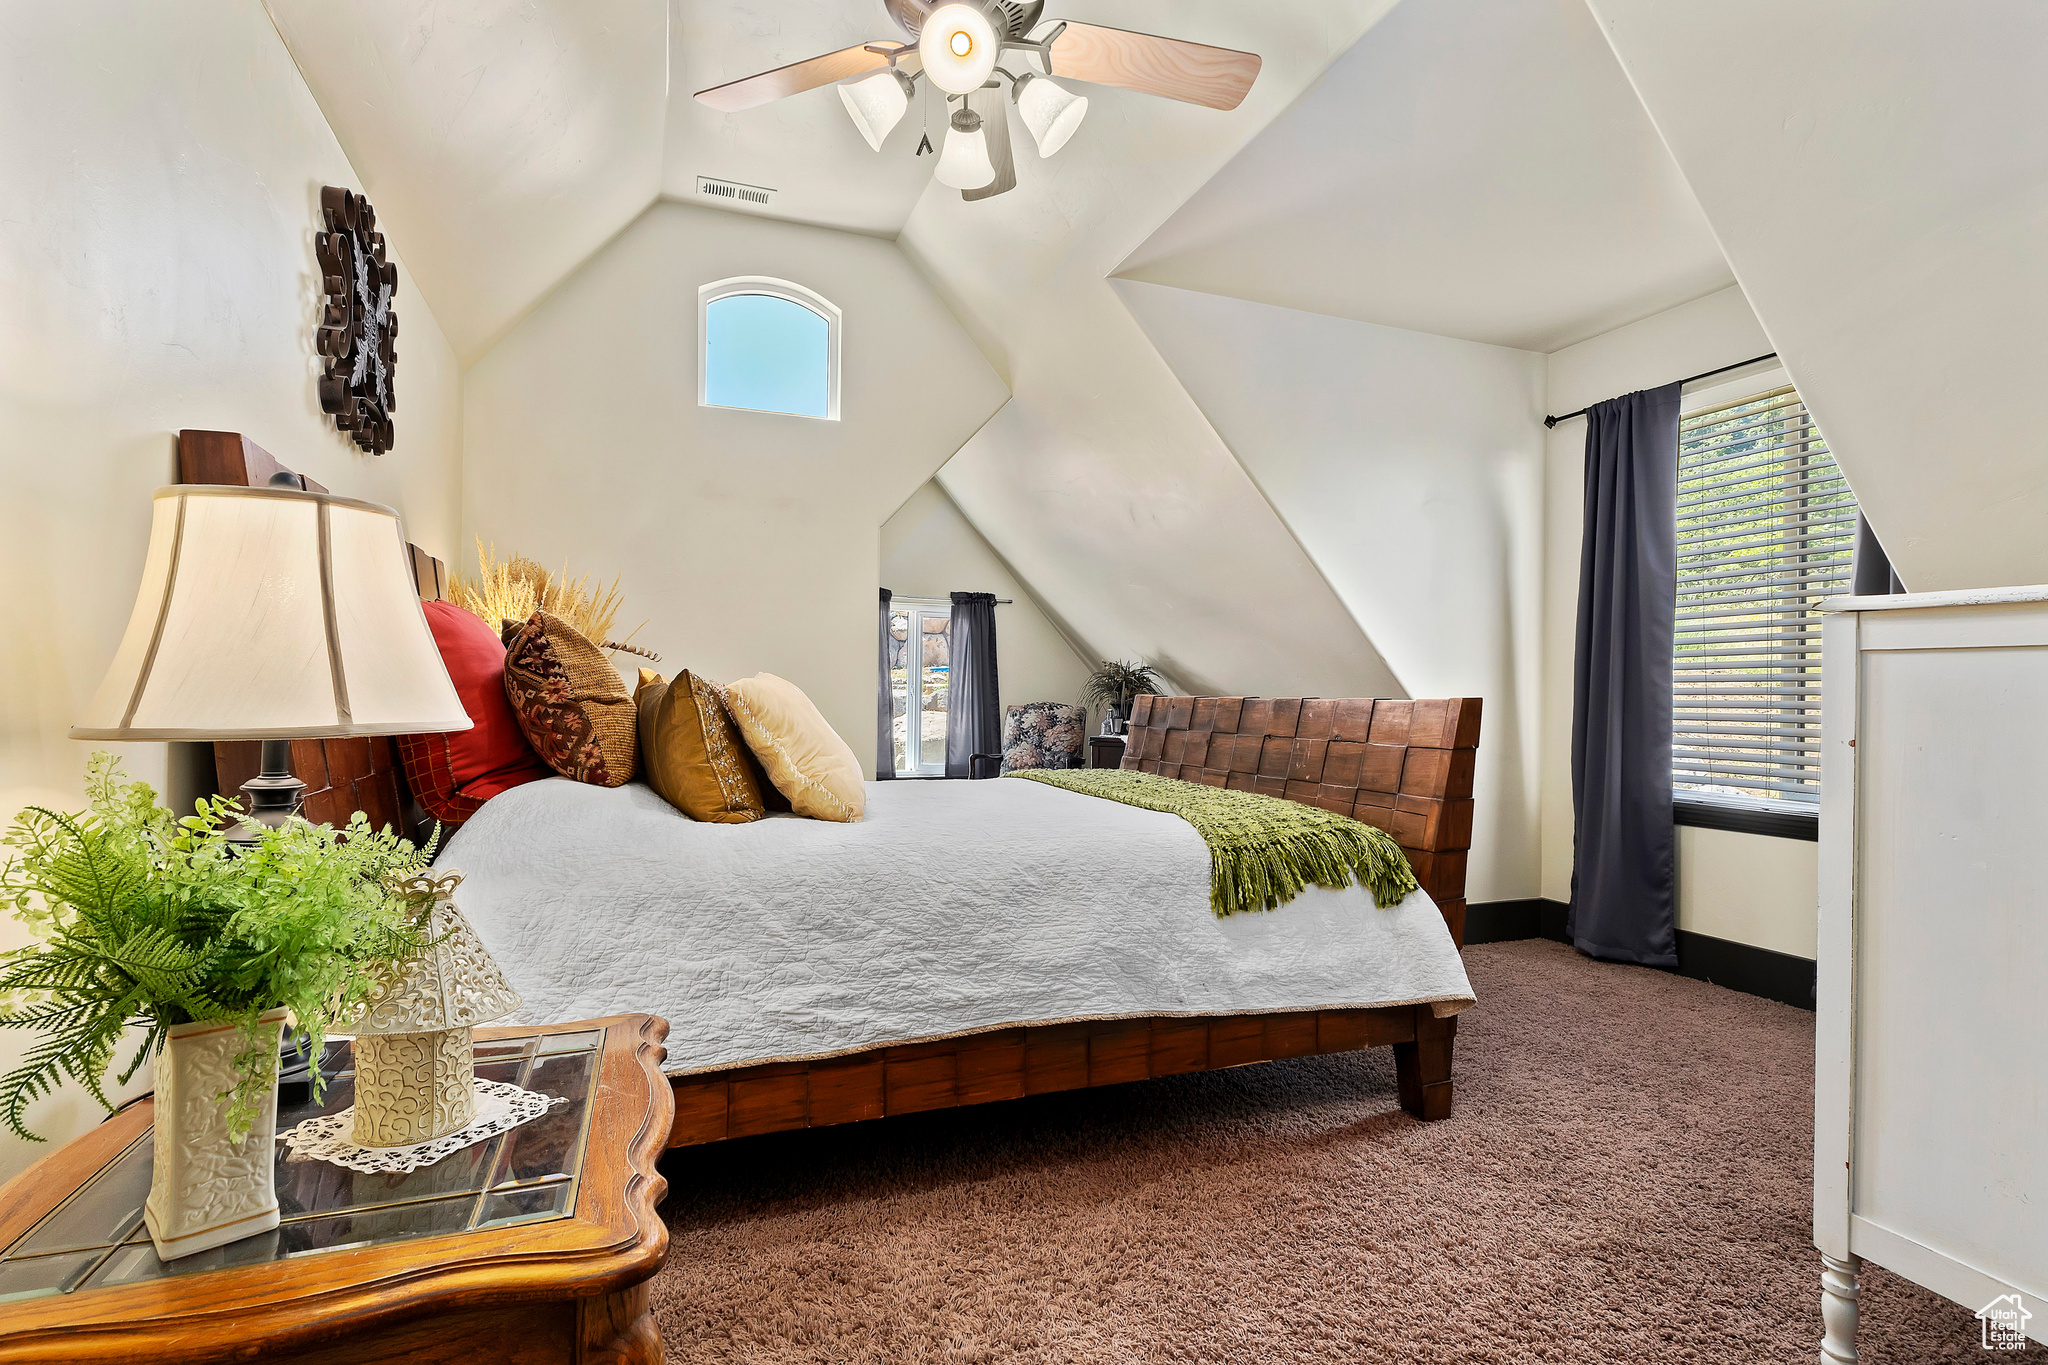 Bedroom with lofted ceiling, dark colored carpet, and ceiling fan